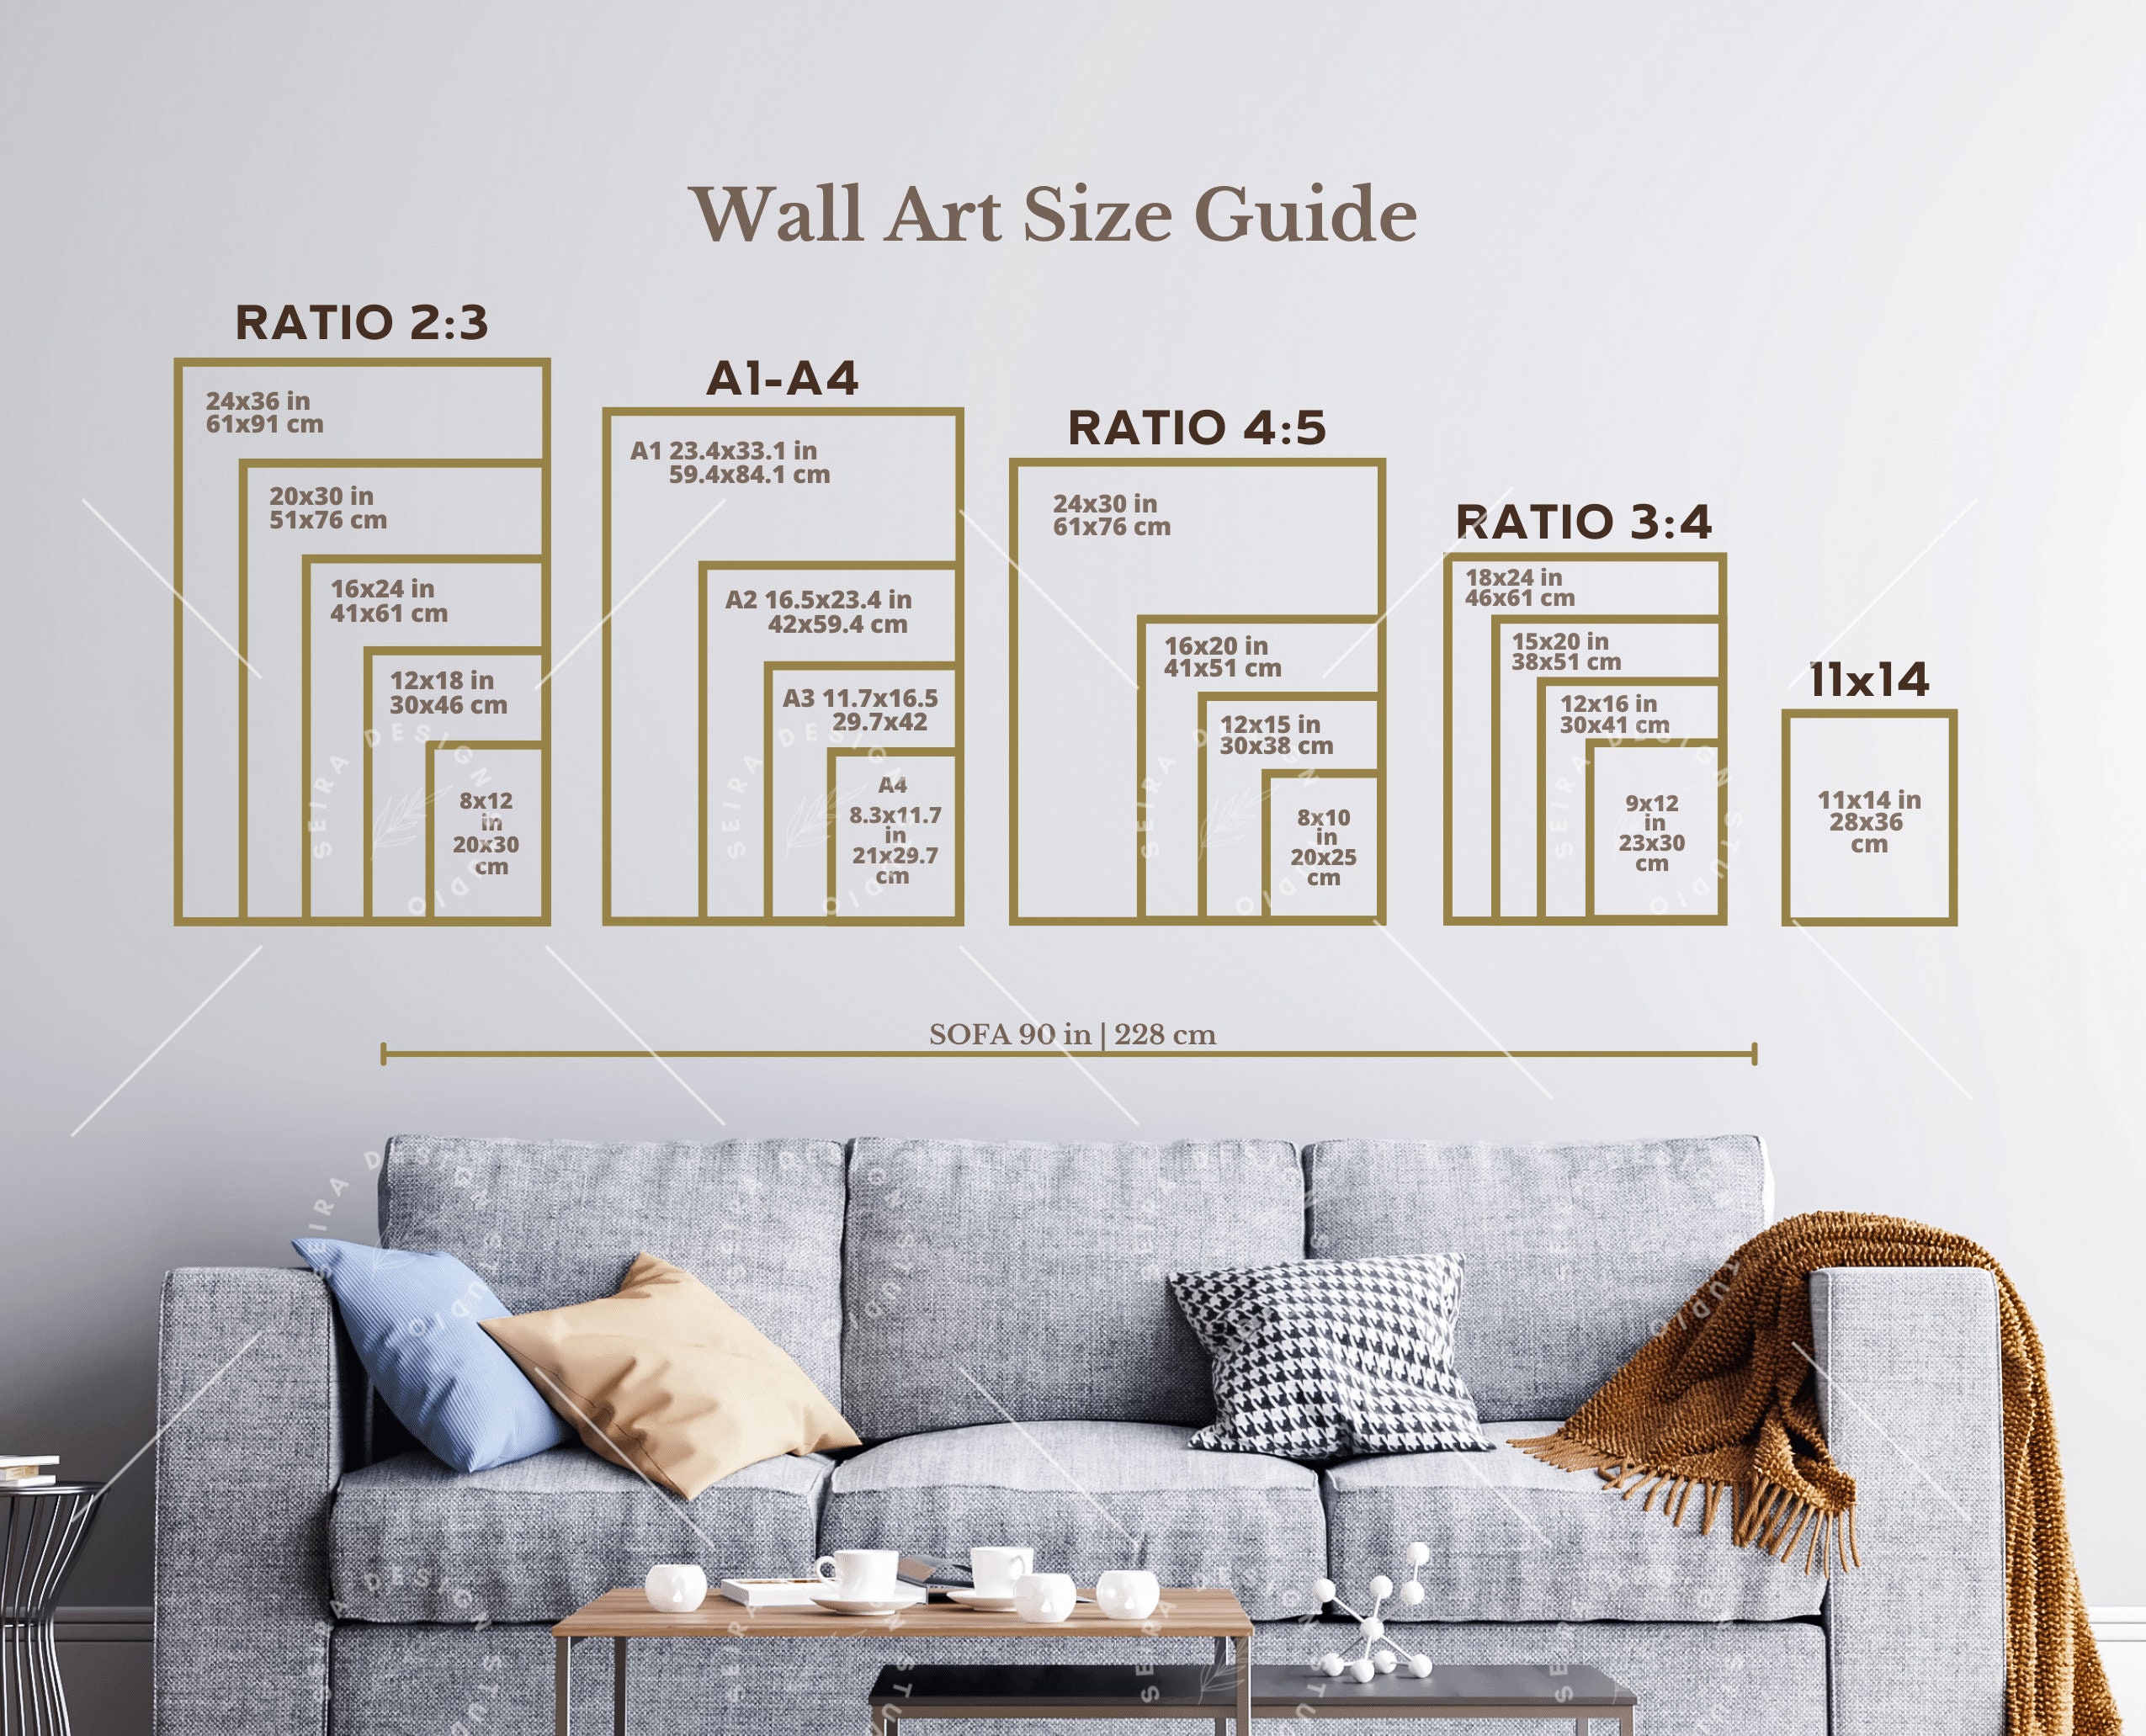 Buy Art Size Guide Sizes Guide Poster Size Online in India - Etsy